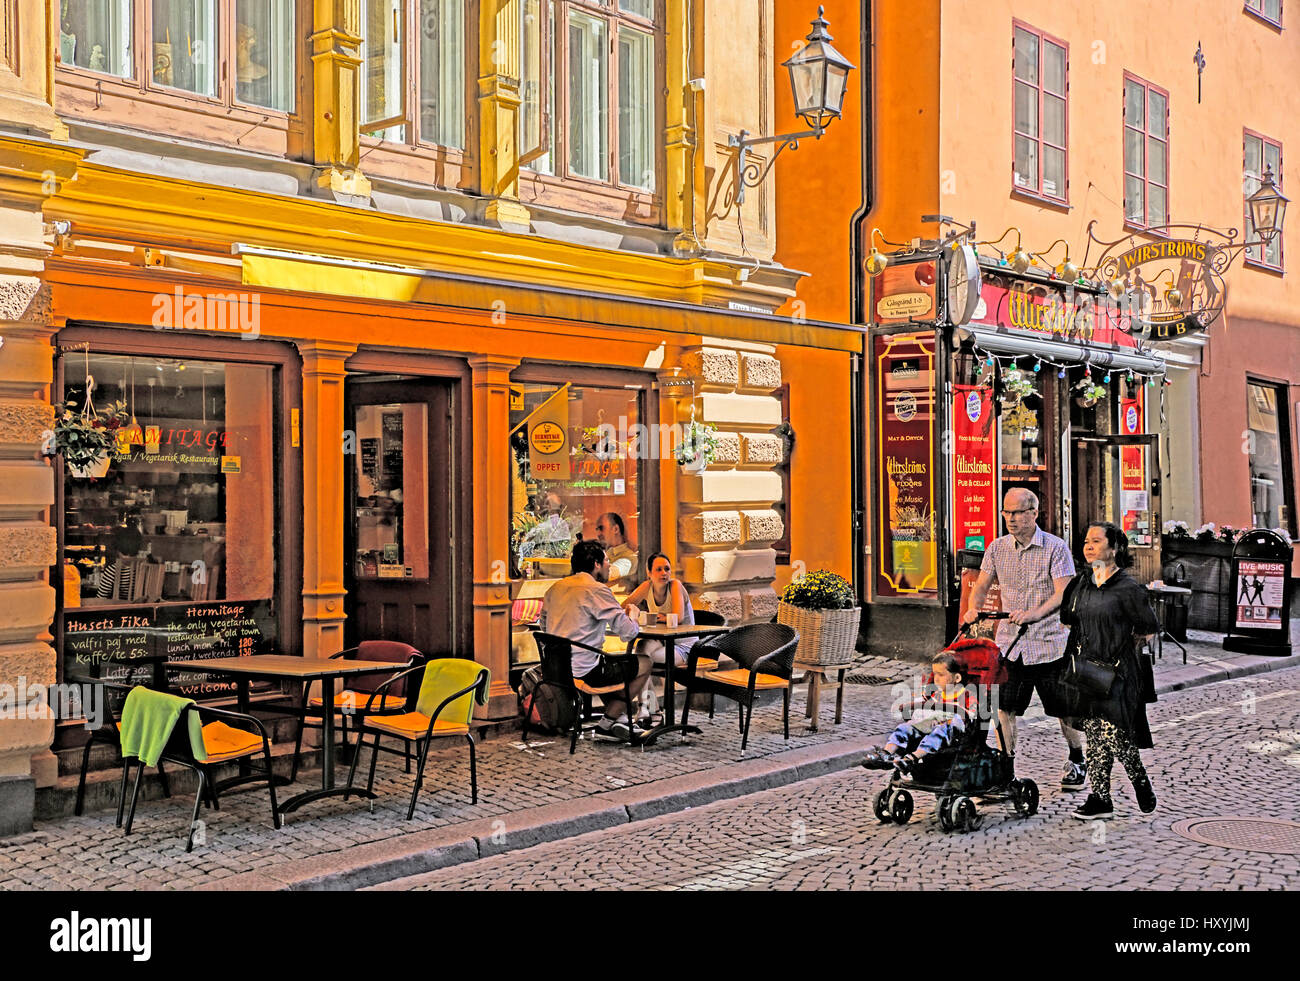 Swedish Cafe High Resolution Stock Photography and Images - Alamy